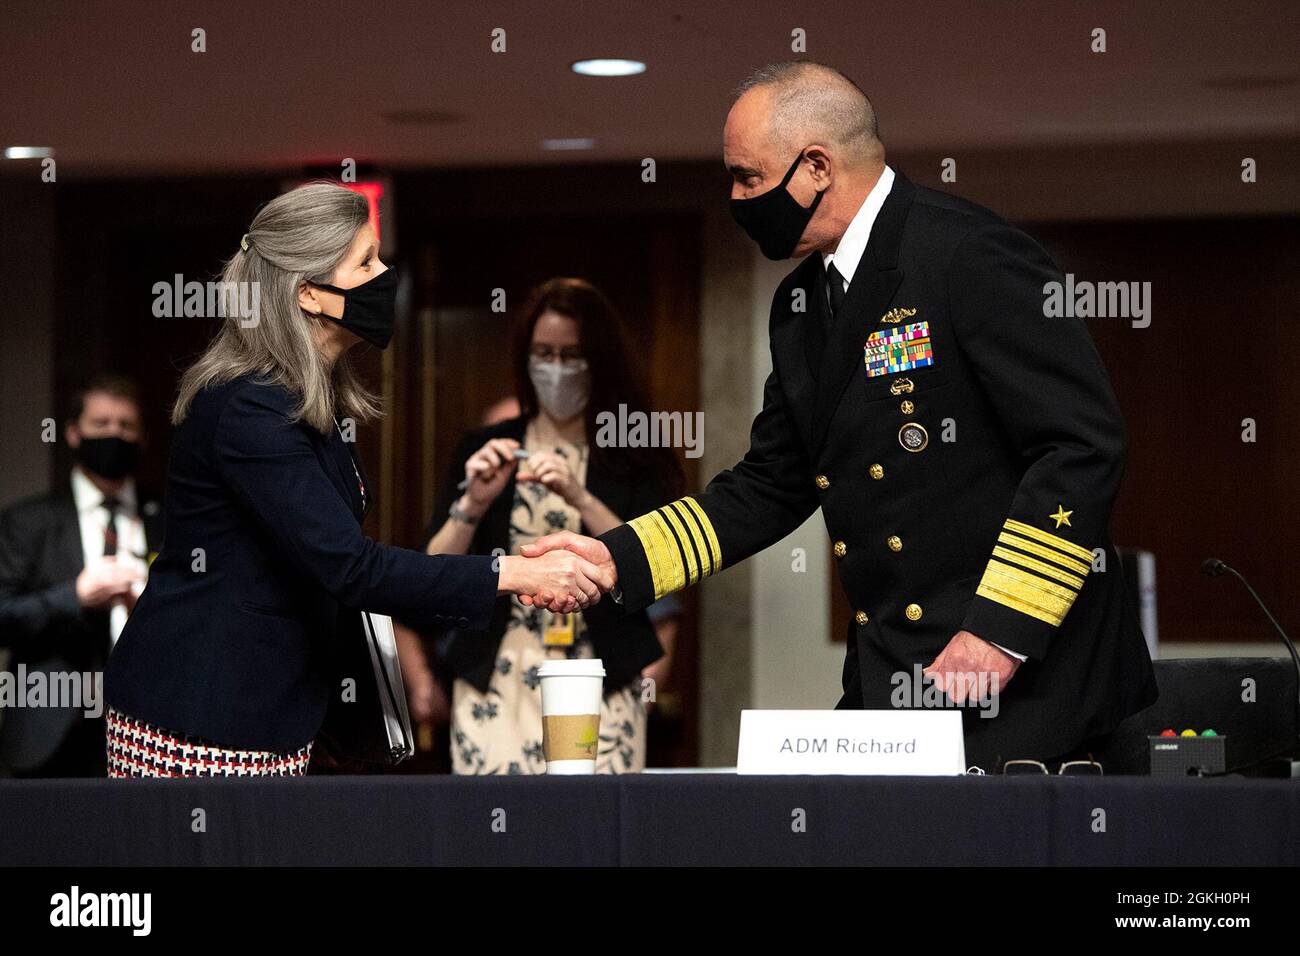 U.S. Joni Ernst (R-Iowa) greets Adm. Charles ‘Chas’ A. Richard, commander U.S. Strategic Command, before he testifies to the Senate Armed Services Committee in Washington, D.C. April 20, 2021. Stock Photo